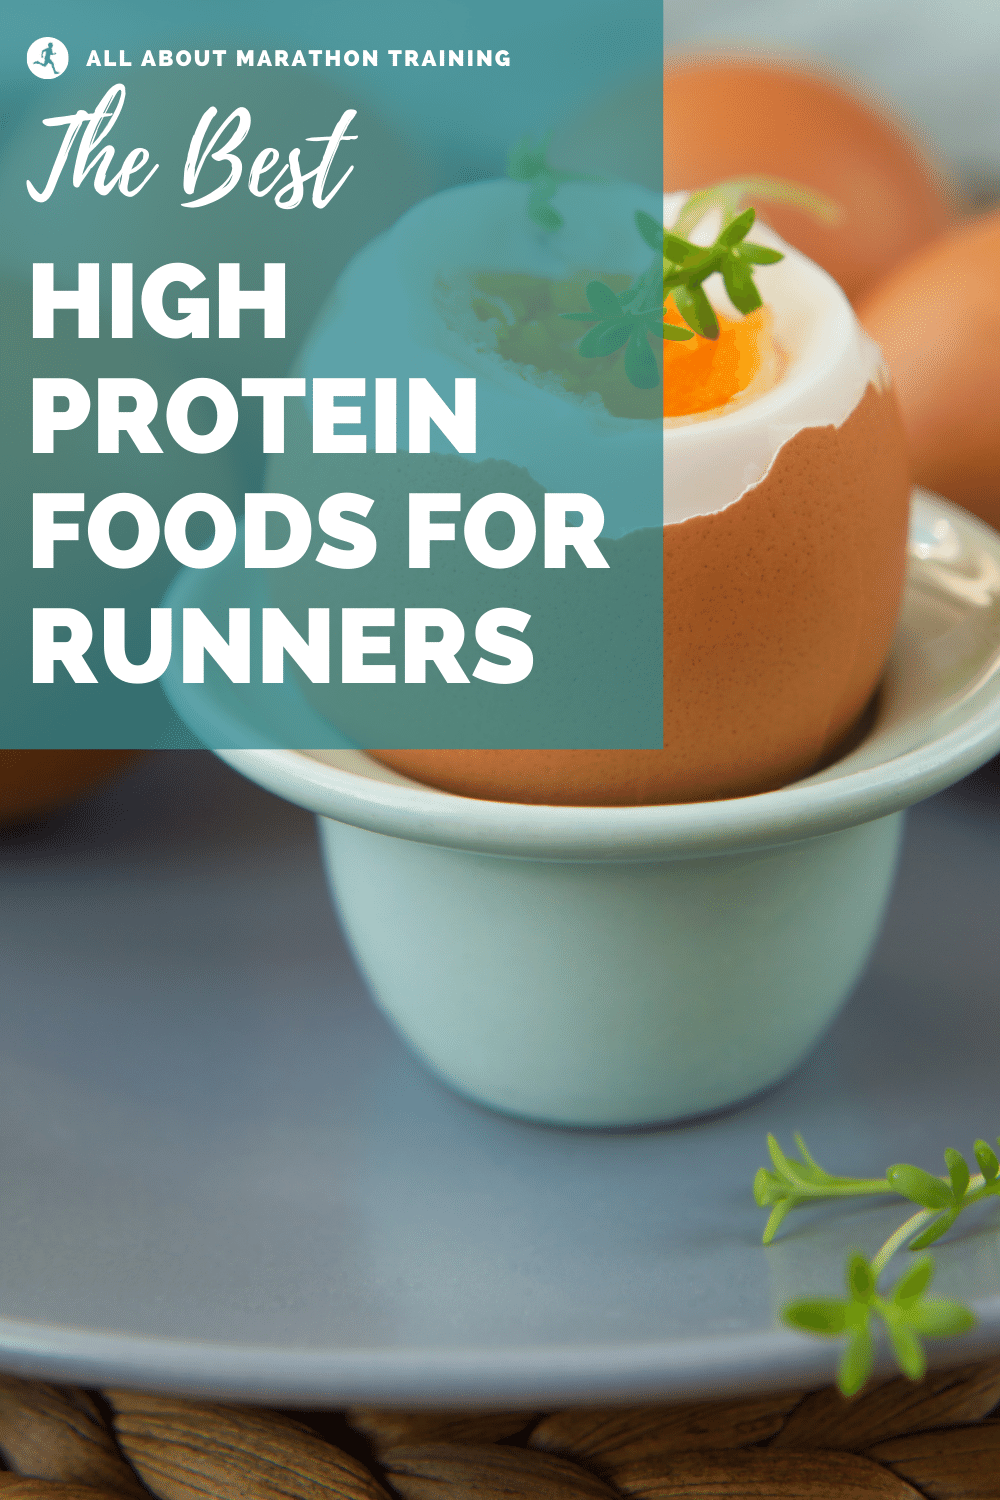 HighProteinFoodForRunnersAltPIN.png